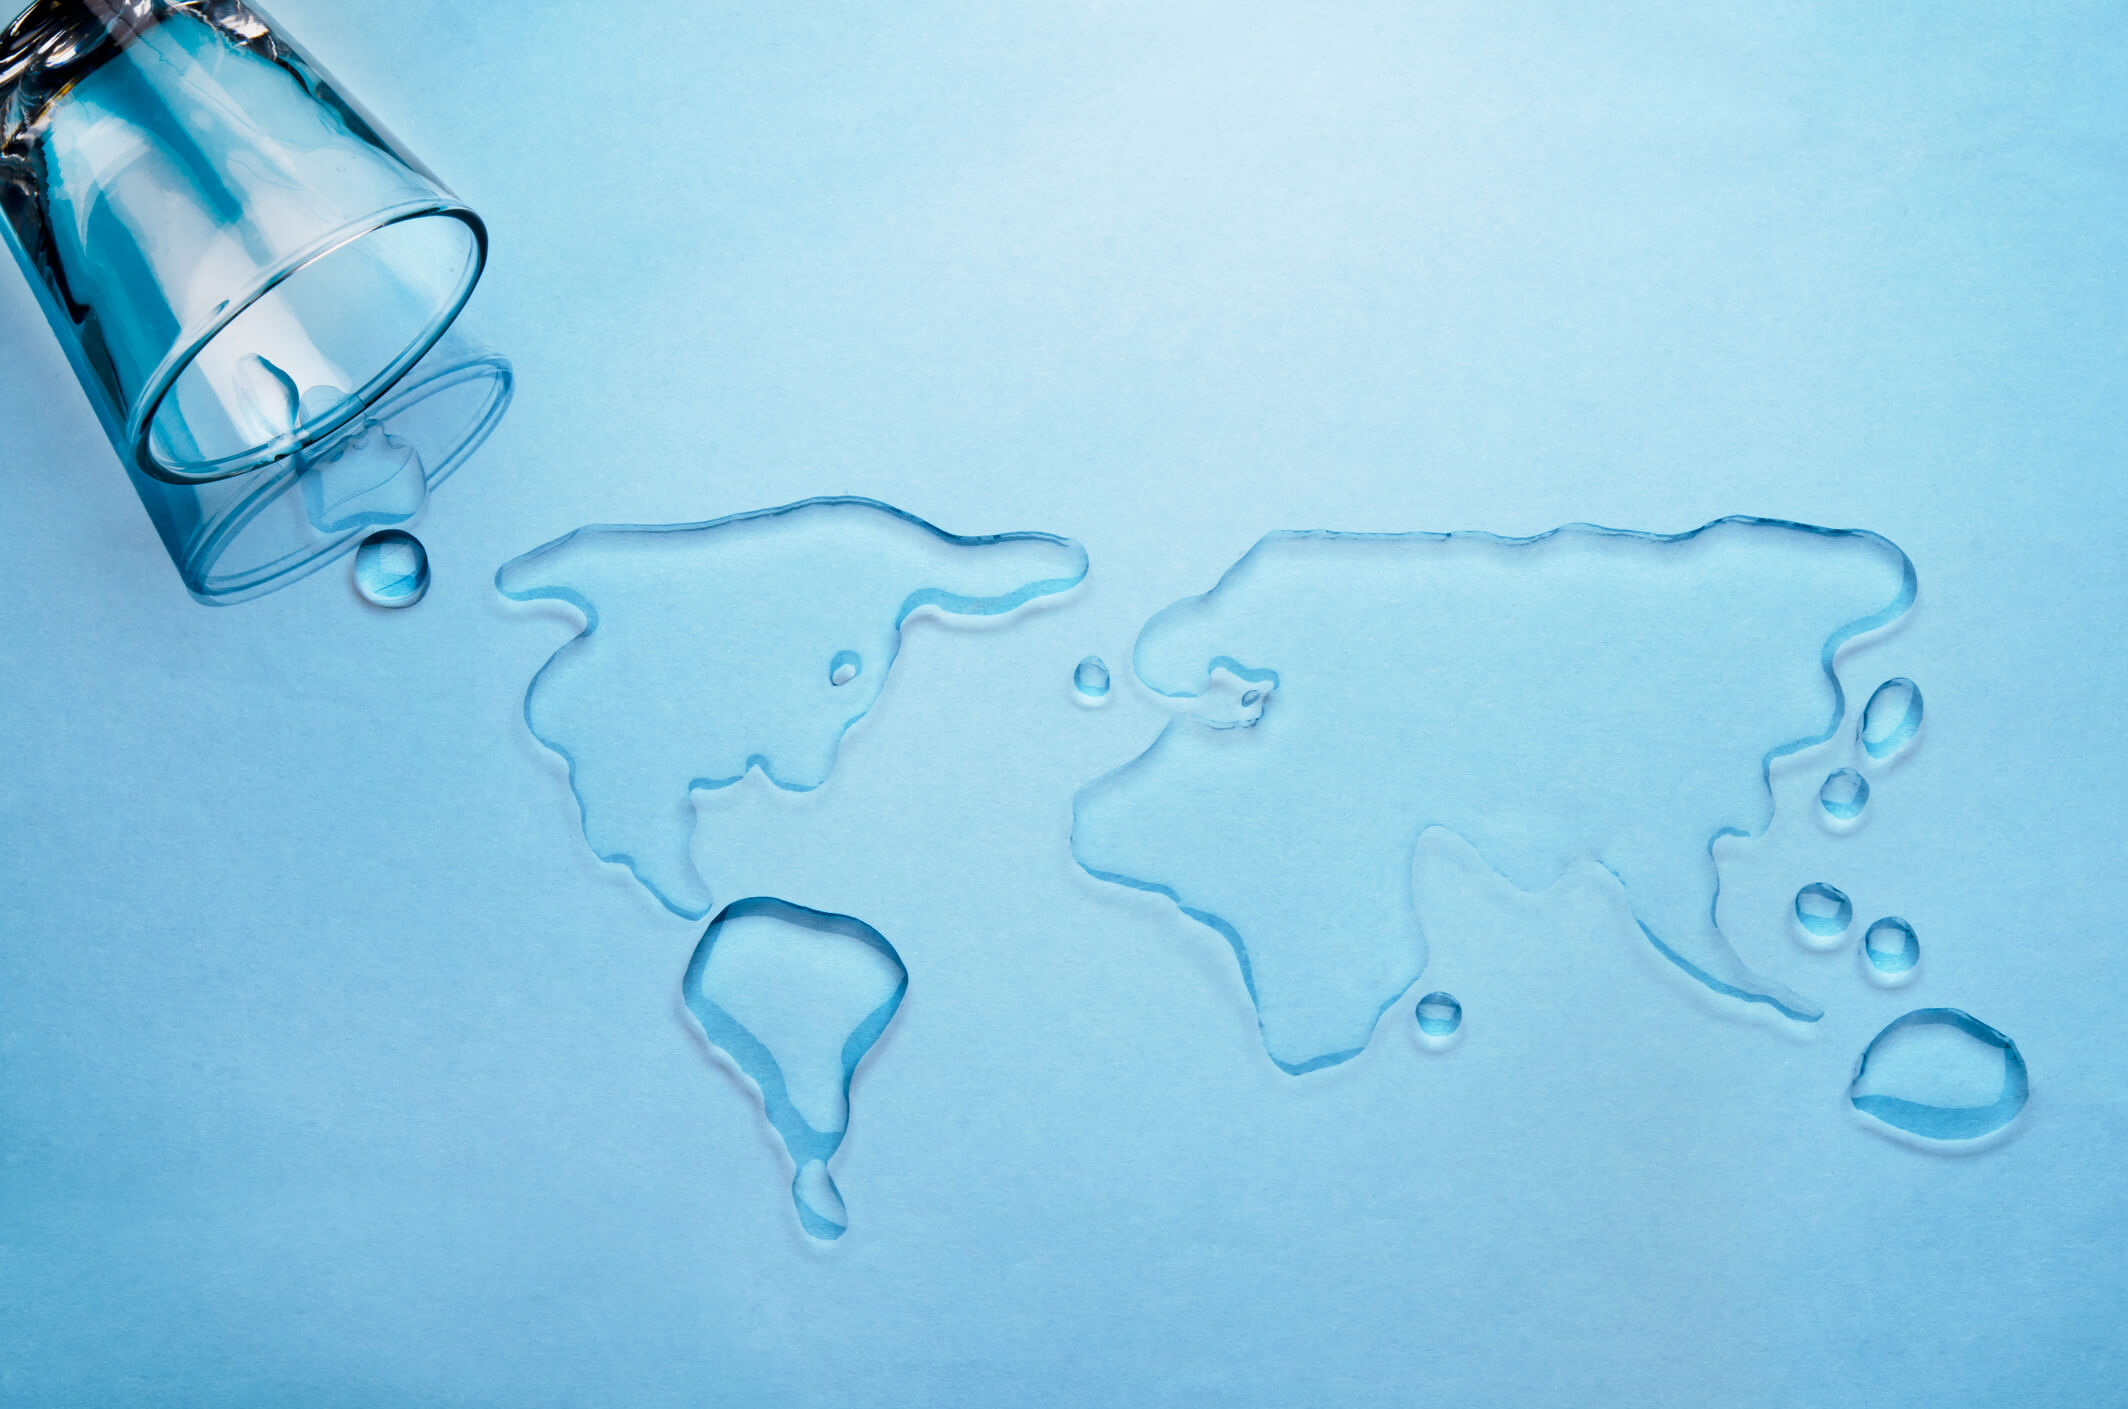 Water spilled in the shape of the continents